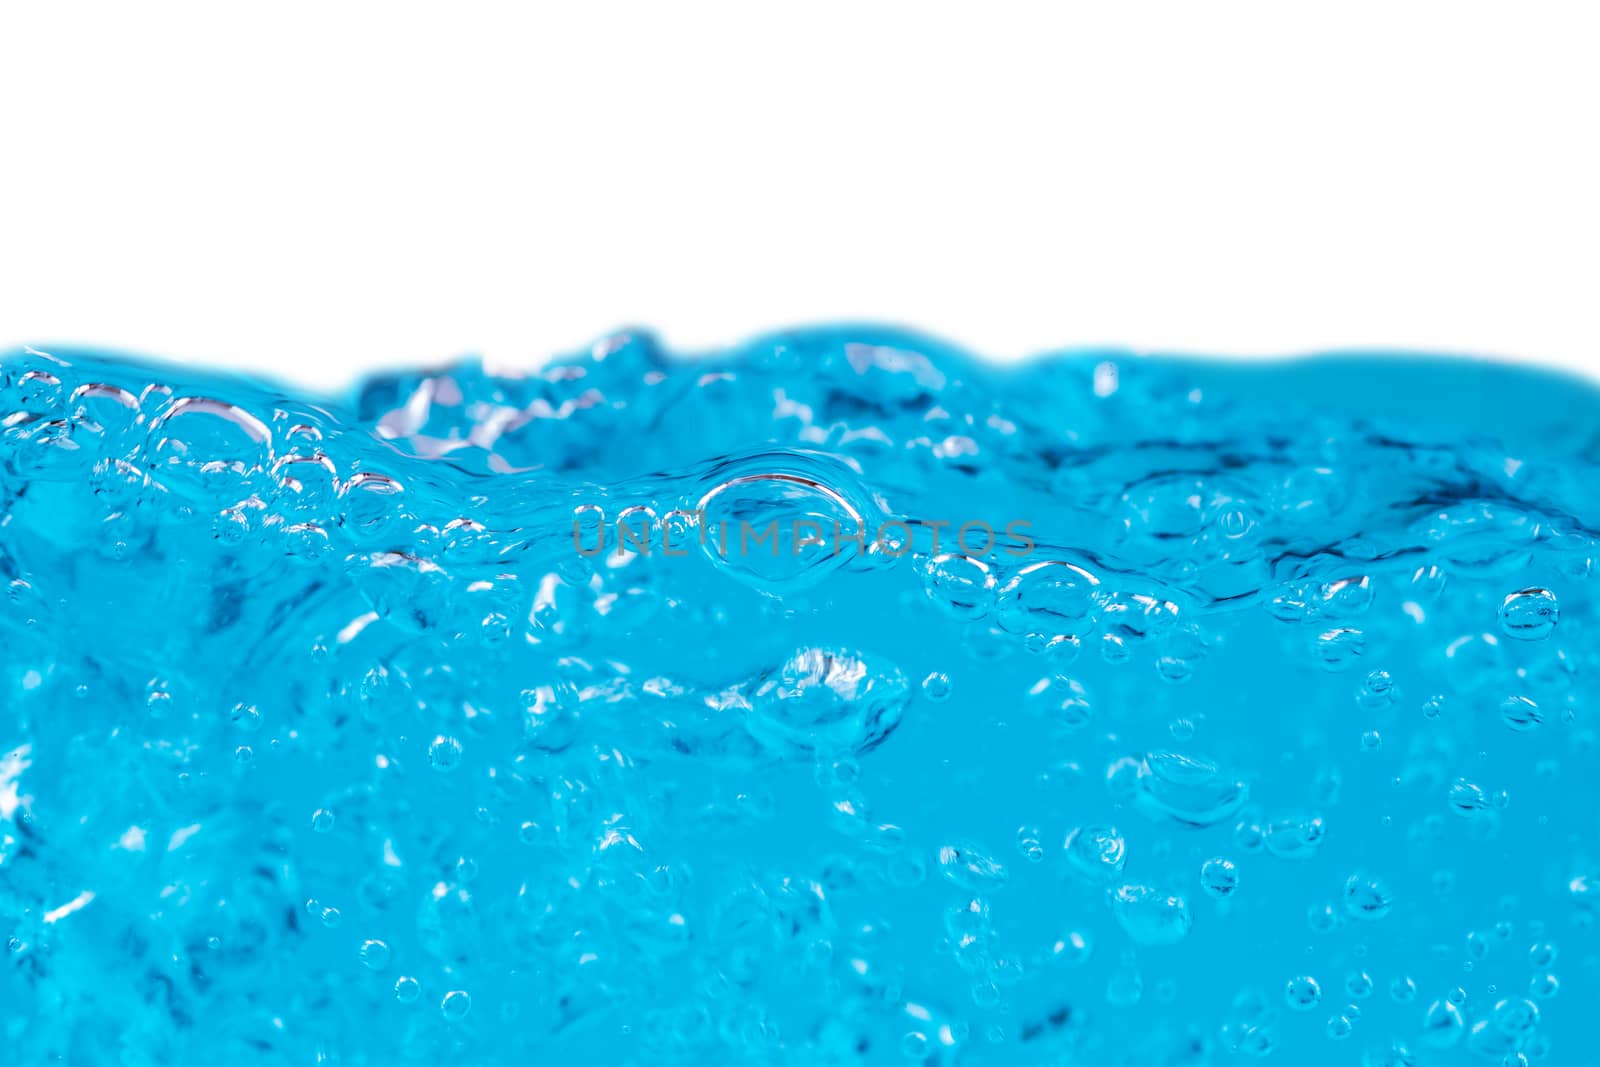 Abstract blue water textures for background